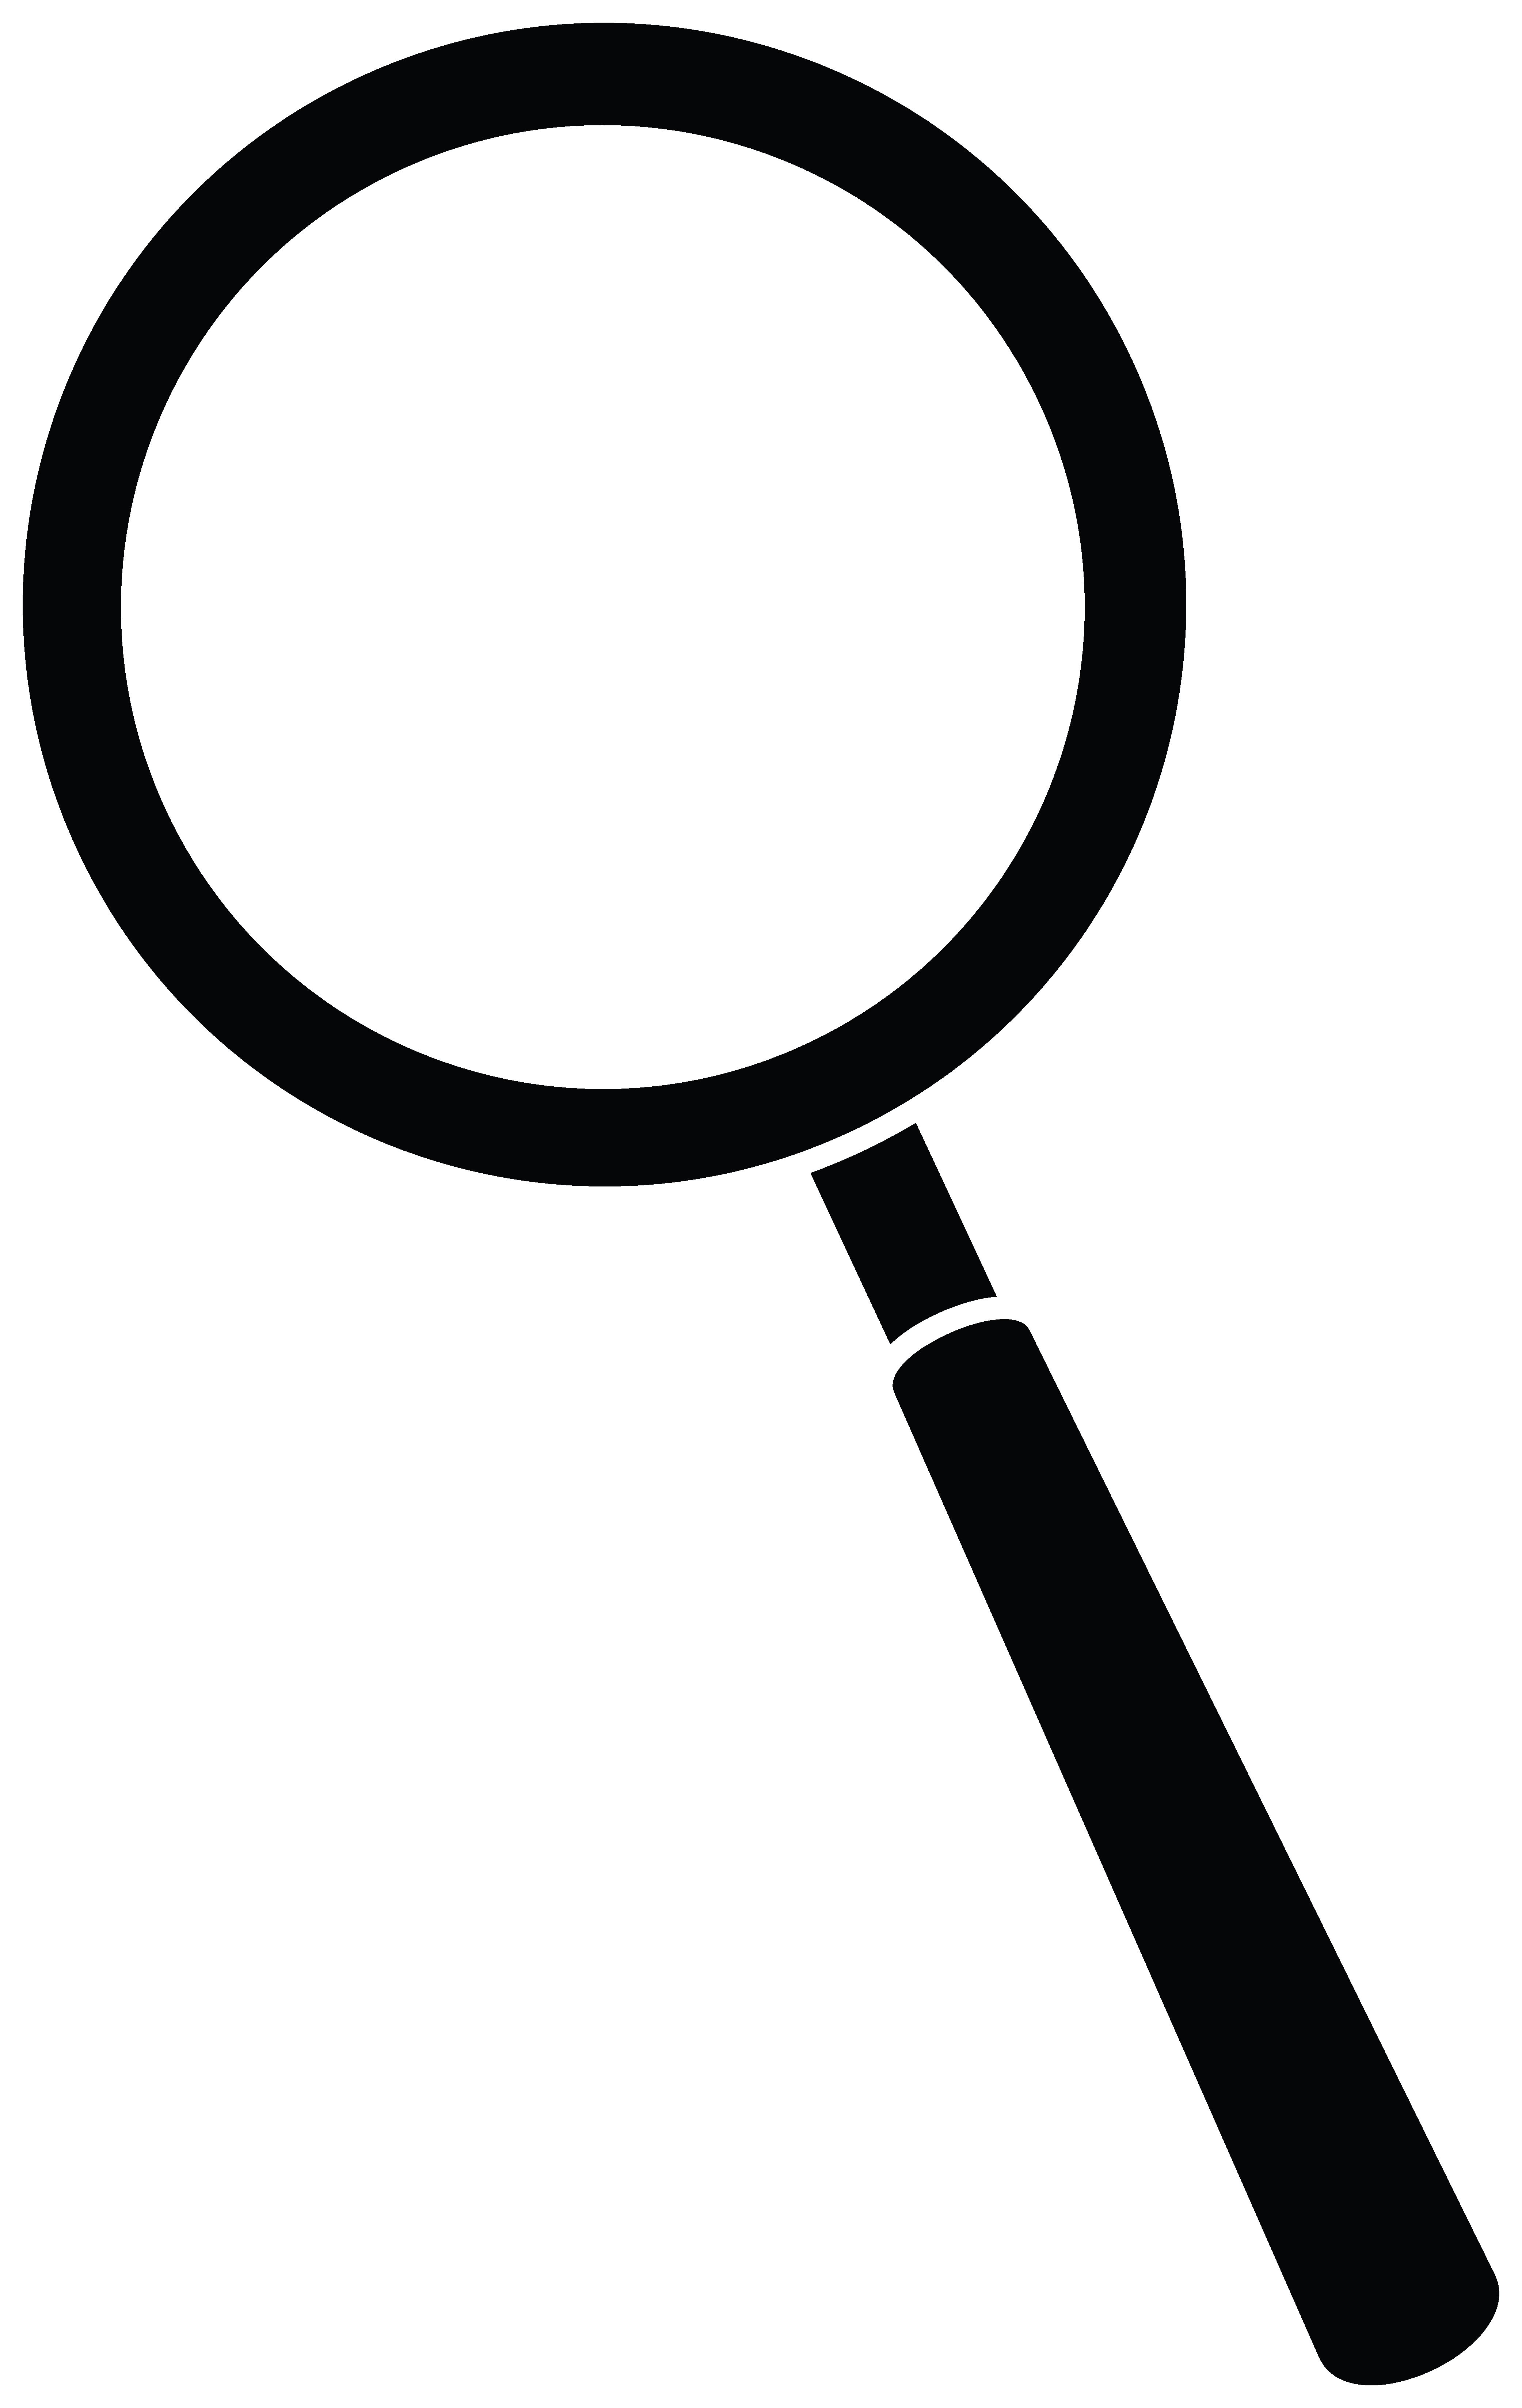 Detective silhouette clip art. Clipart map magnifying glass